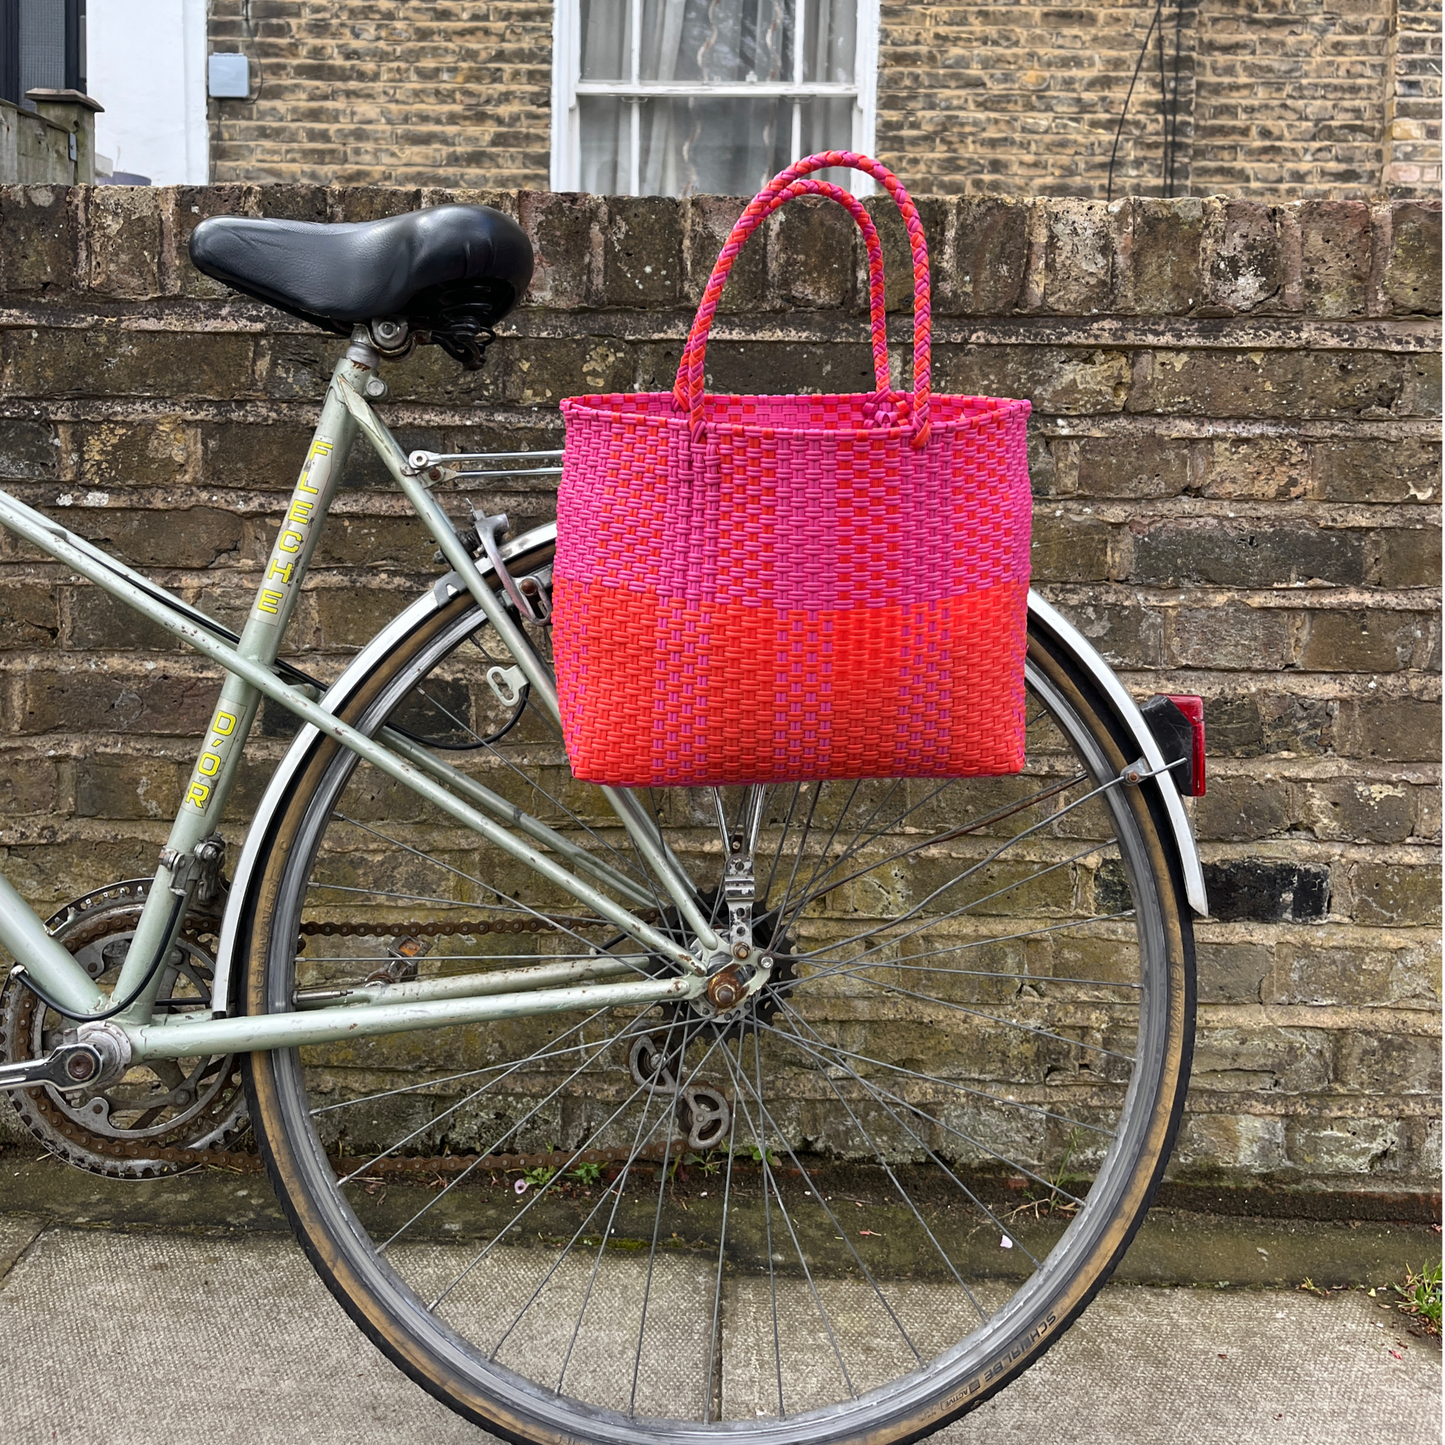 Bicycle Pannier recycled red & orange plastic woven basket tote bag